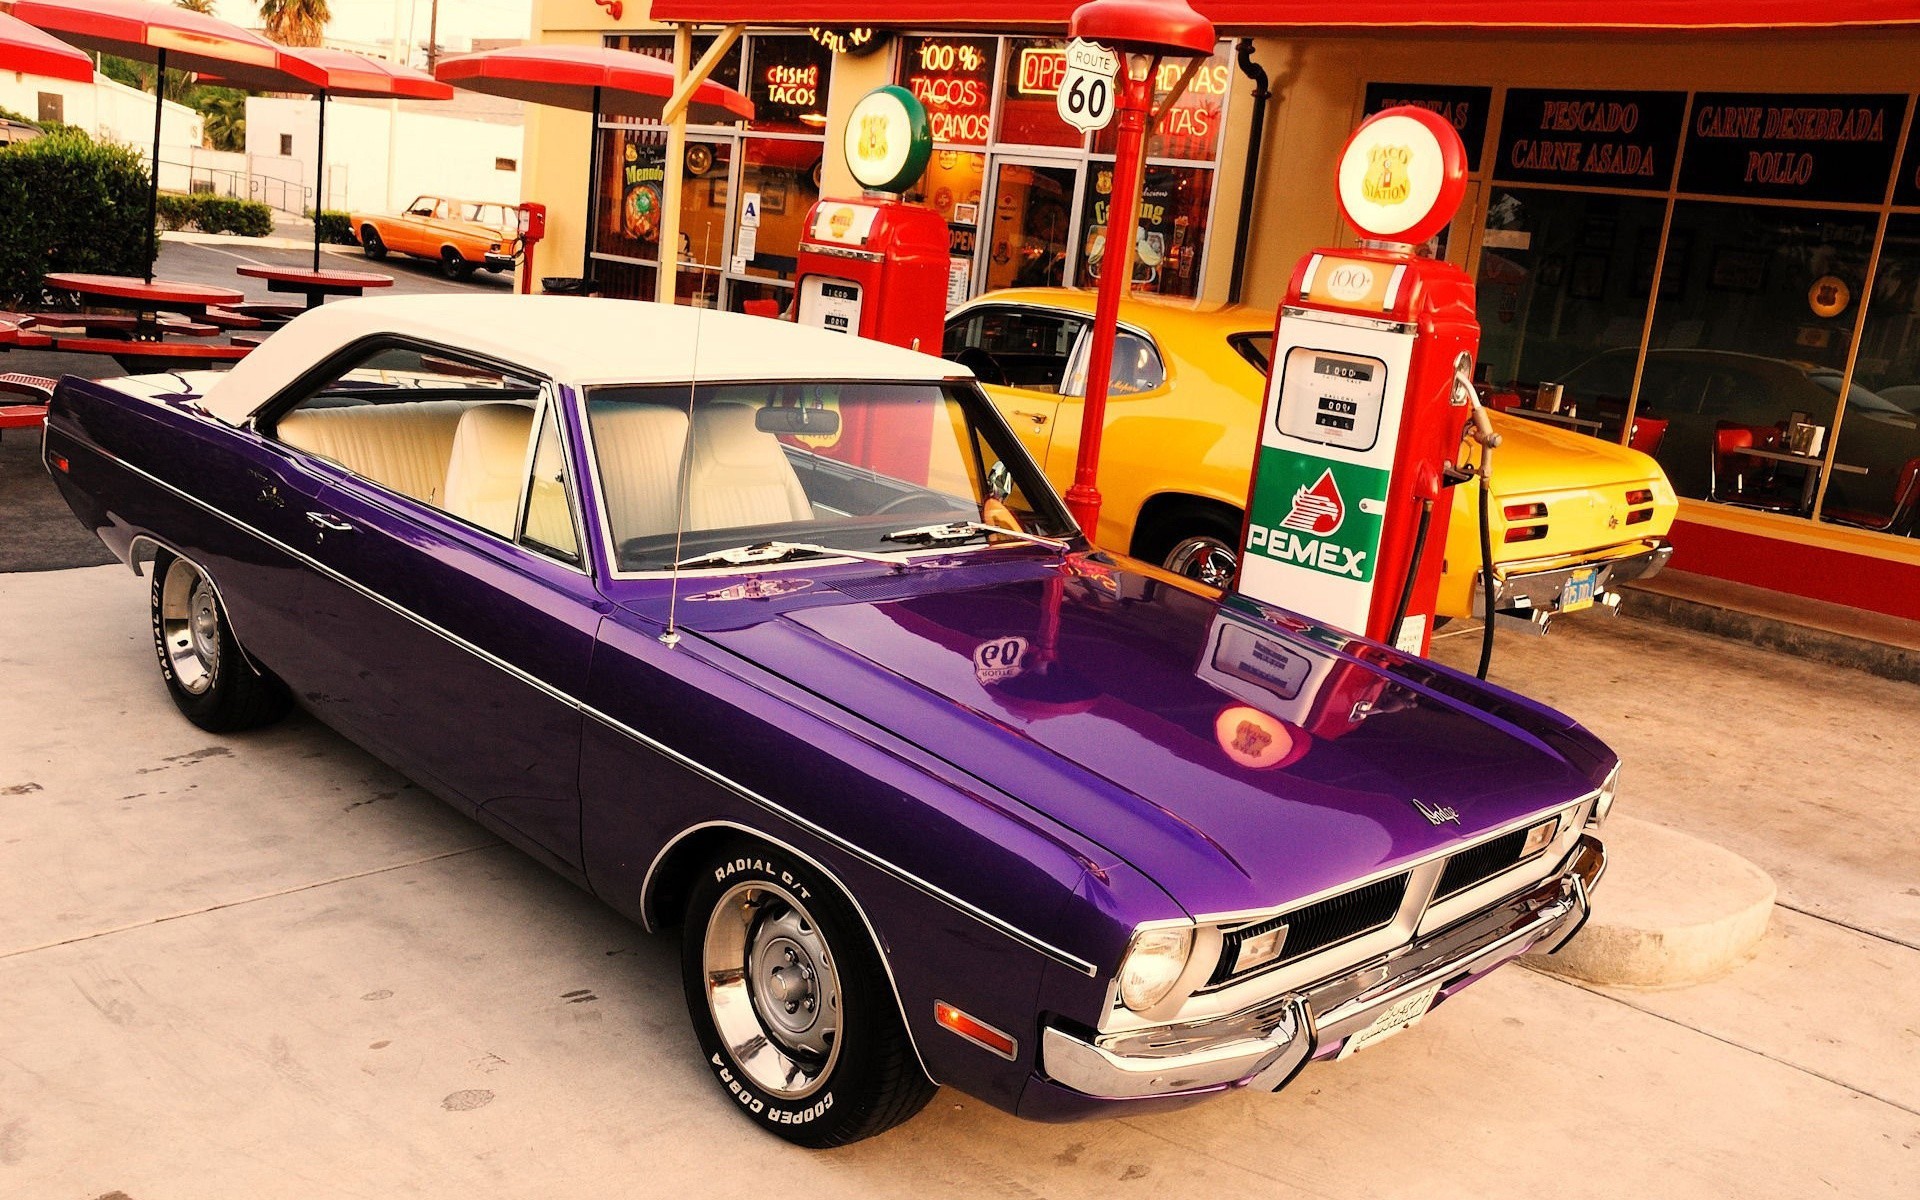 General 1920x1200 classic car car purple cars yellow cars vehicle gas station Dodge American cars